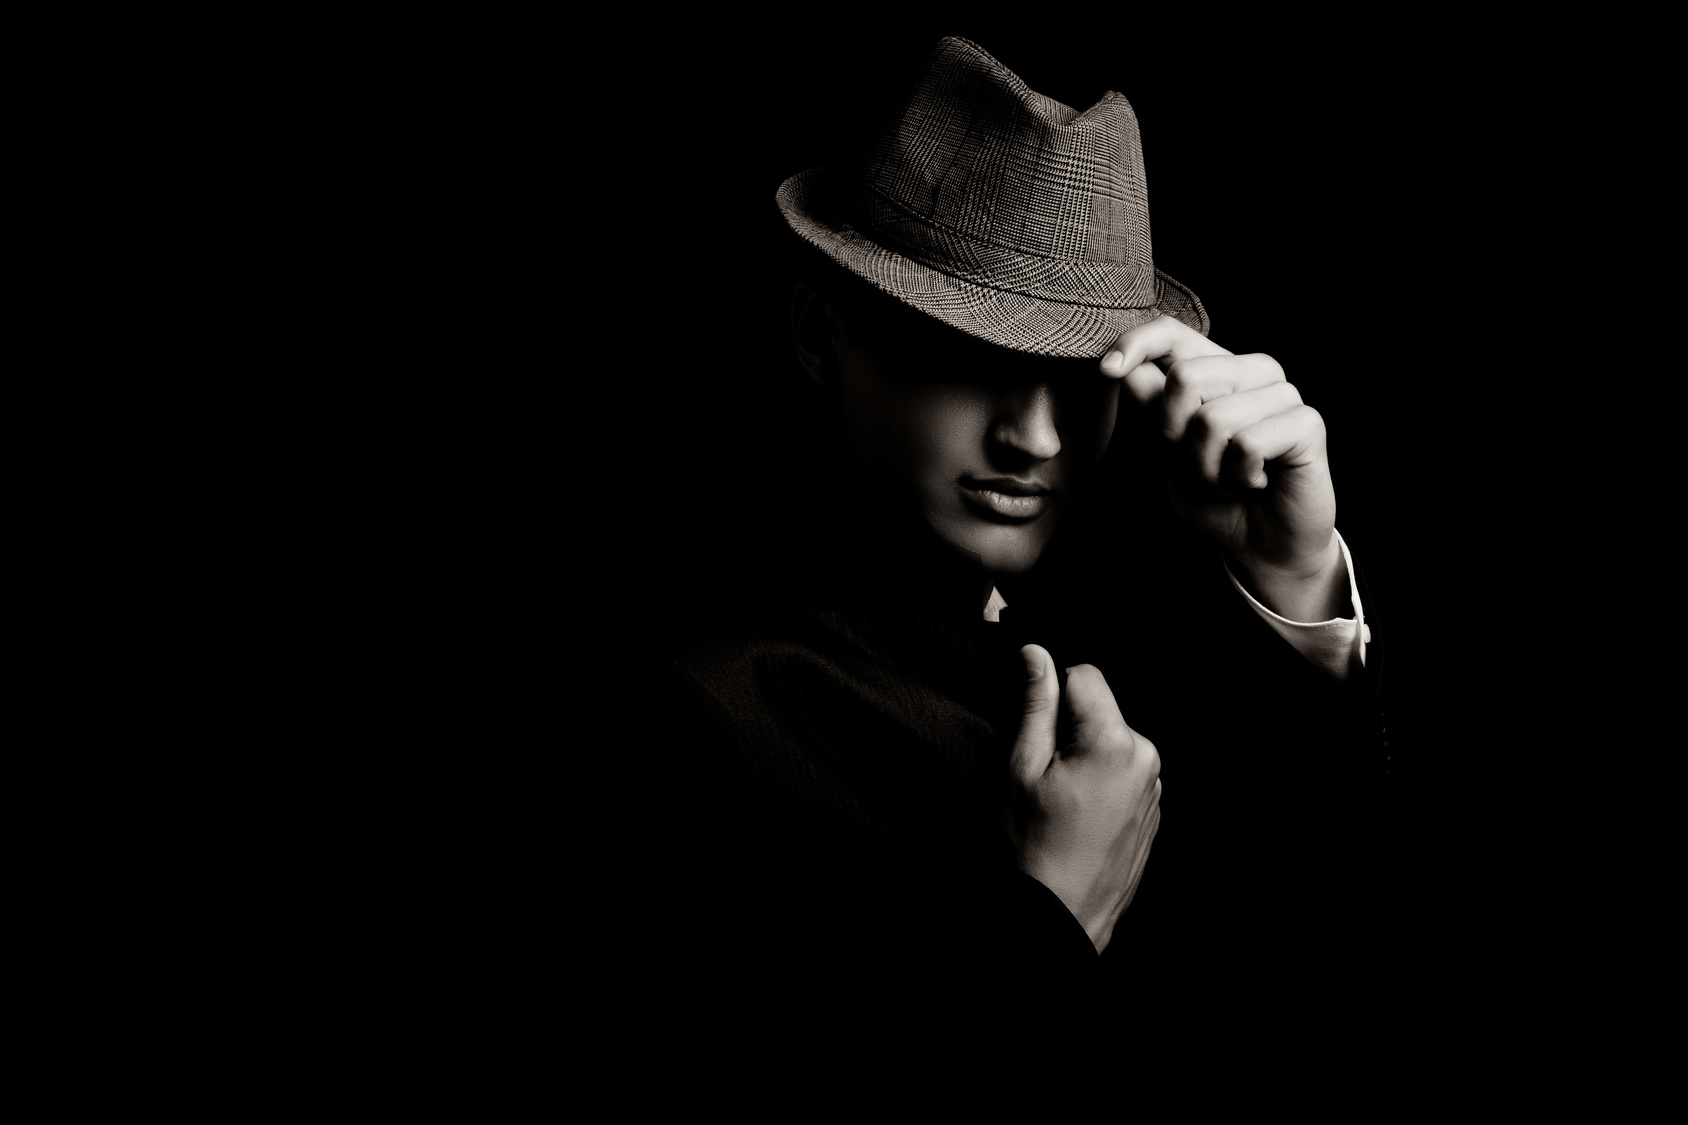 low key portrait of young gangster with hat in the darkness. Sepia toning.